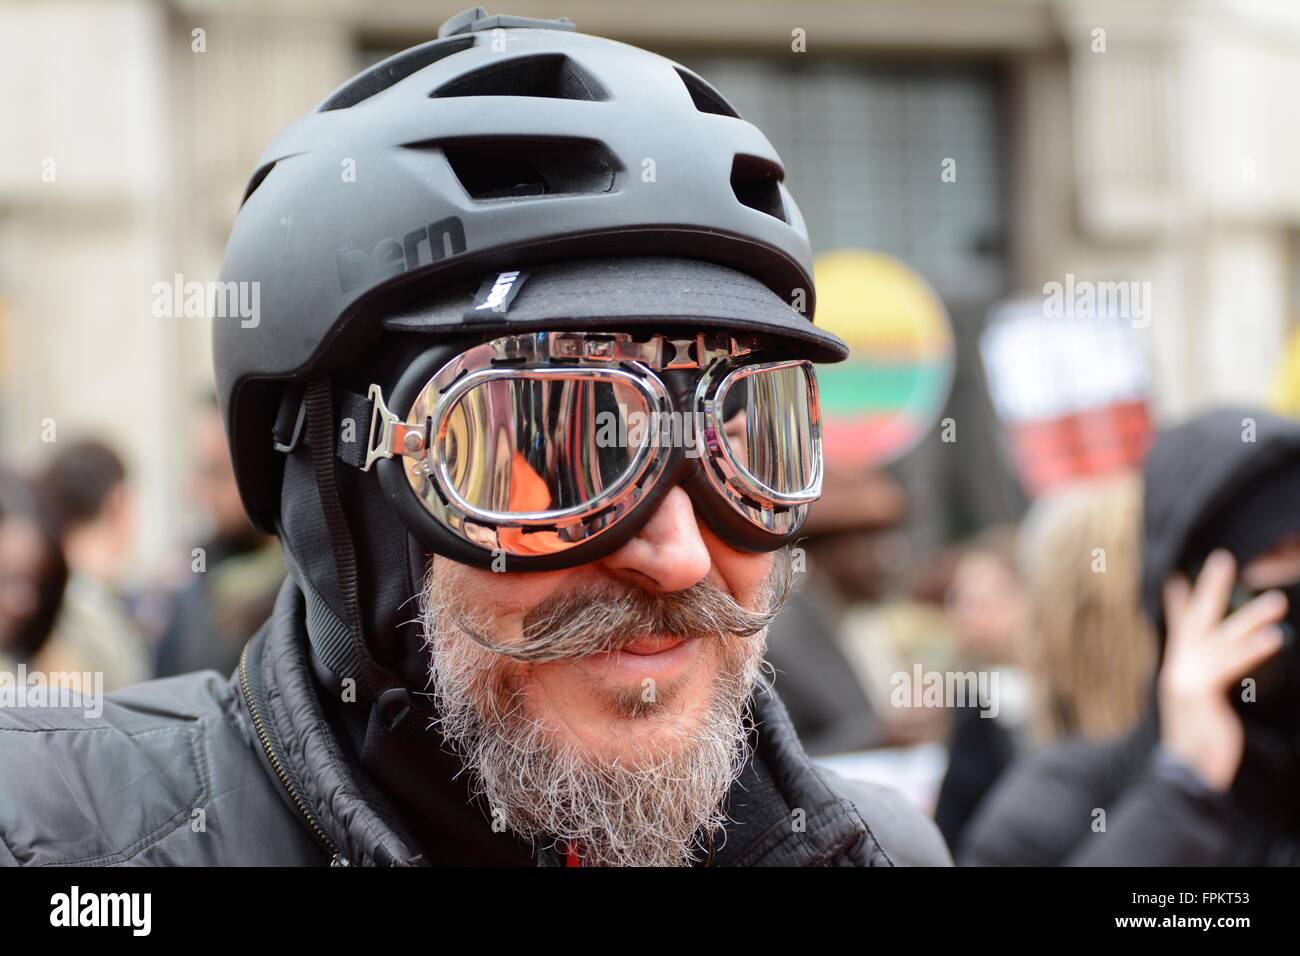 London, UK. March 19th 2016. Protester in a very flambouyant attire. Credit:  Marc Ward/Alamy Live News Stock Photo